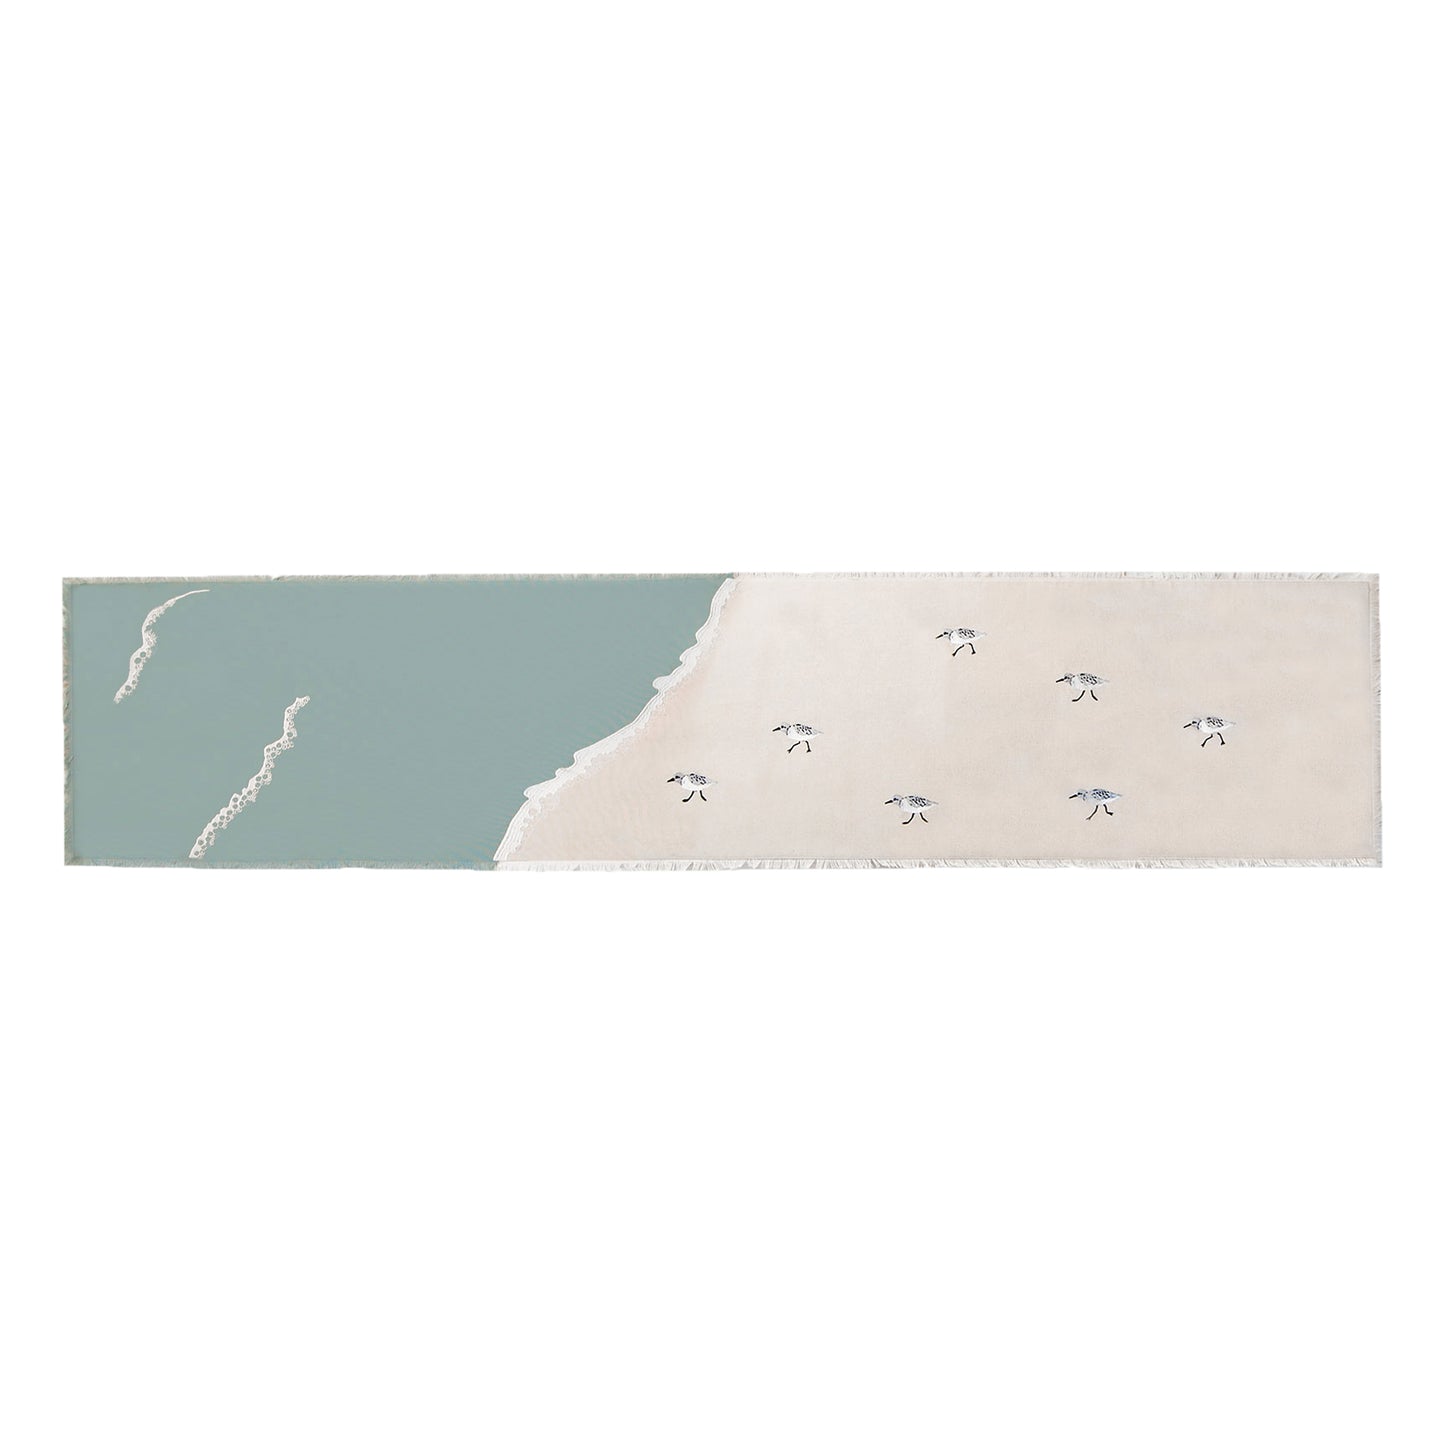 Sandpipers embroidered on a cotton fringed table runner featuring blue waves on sand. 